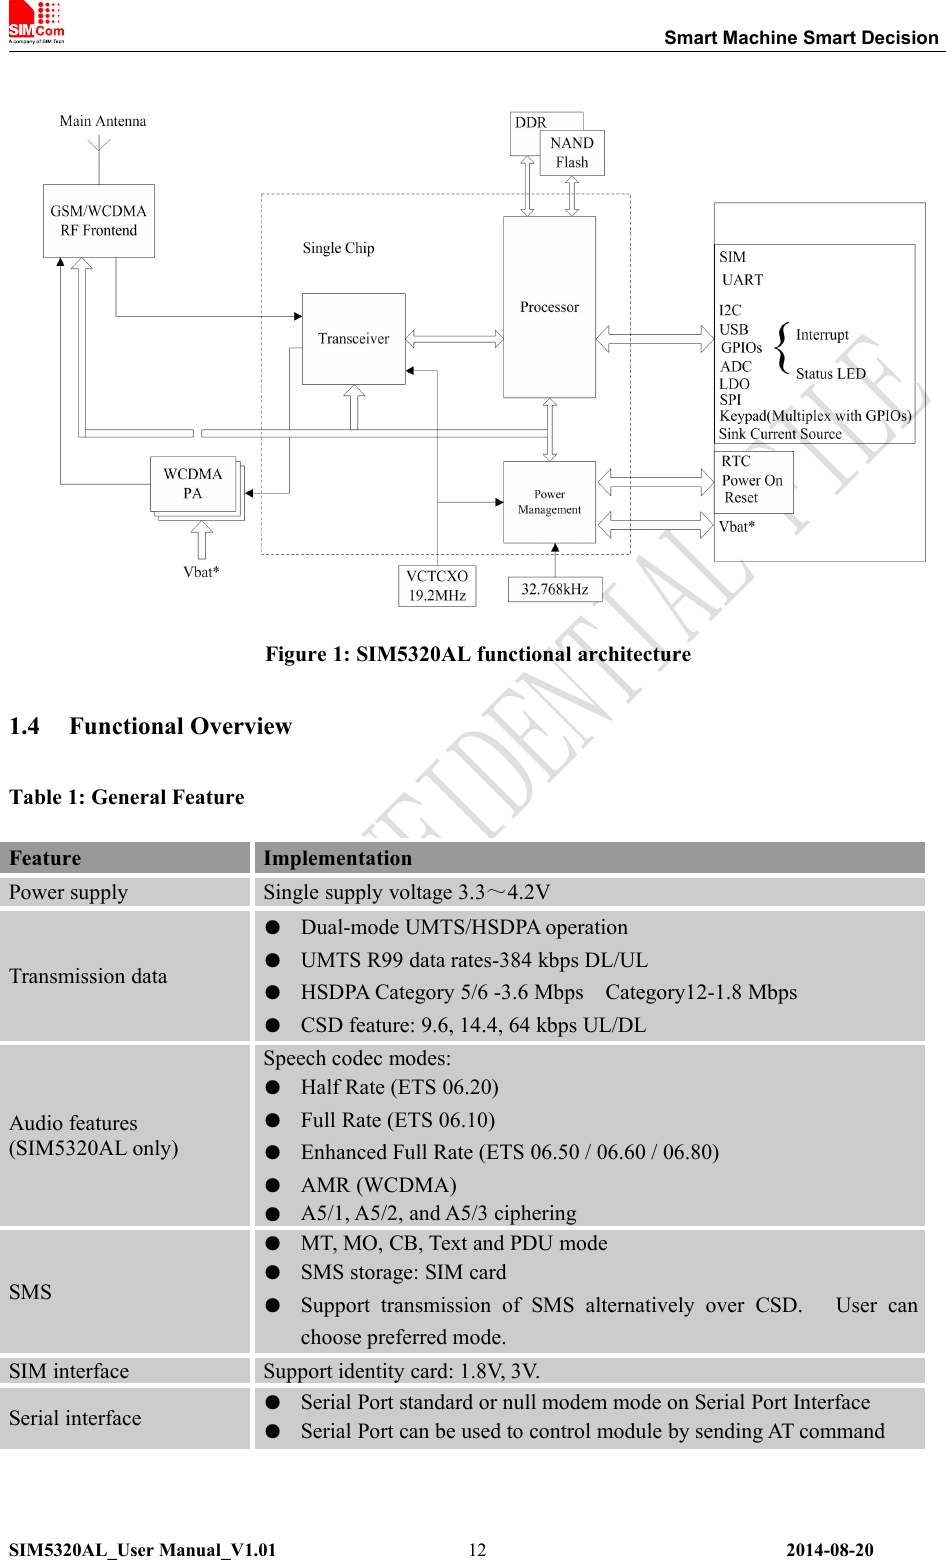 Smart Machine Smart DecisionSIM5320AL_User Manual_V1.01 2014-08-2012Figure 1: SIM5320AL functional architecture1.4 Functional OverviewTable 1: General FeatureFeature ImplementationPower supply Single supply voltage 3.3～4.2VTransmission data●Dual-mode UMTS/HSDPA operation●UMTS R99 data rates-384 kbps DL/UL●HSDPA Category 5/6 -3.6 Mbps Category12-1.8 Mbps●CSD feature: 9.6, 14.4, 64 kbps UL/DLAudio features(SIM5320AL only)Speech codec modes:●Half Rate (ETS 06.20)●Full Rate (ETS 06.10)●Enhanced Full Rate (ETS 06.50 / 06.60 / 06.80)●AMR (WCDMA)●A5/1, A5/2, and A5/3 cipheringSMS●MT, MO, CB, Text and PDU mode●SMS storage: SIM card●Support transmission of SMS alternatively over CSD. User canchoose preferred mode.SIM interface Support identity card: 1.8V, 3V.Serial interface●Serial Port standard or null modem mode on Serial Port Interface●Serial Port can be used to control module by sending AT command